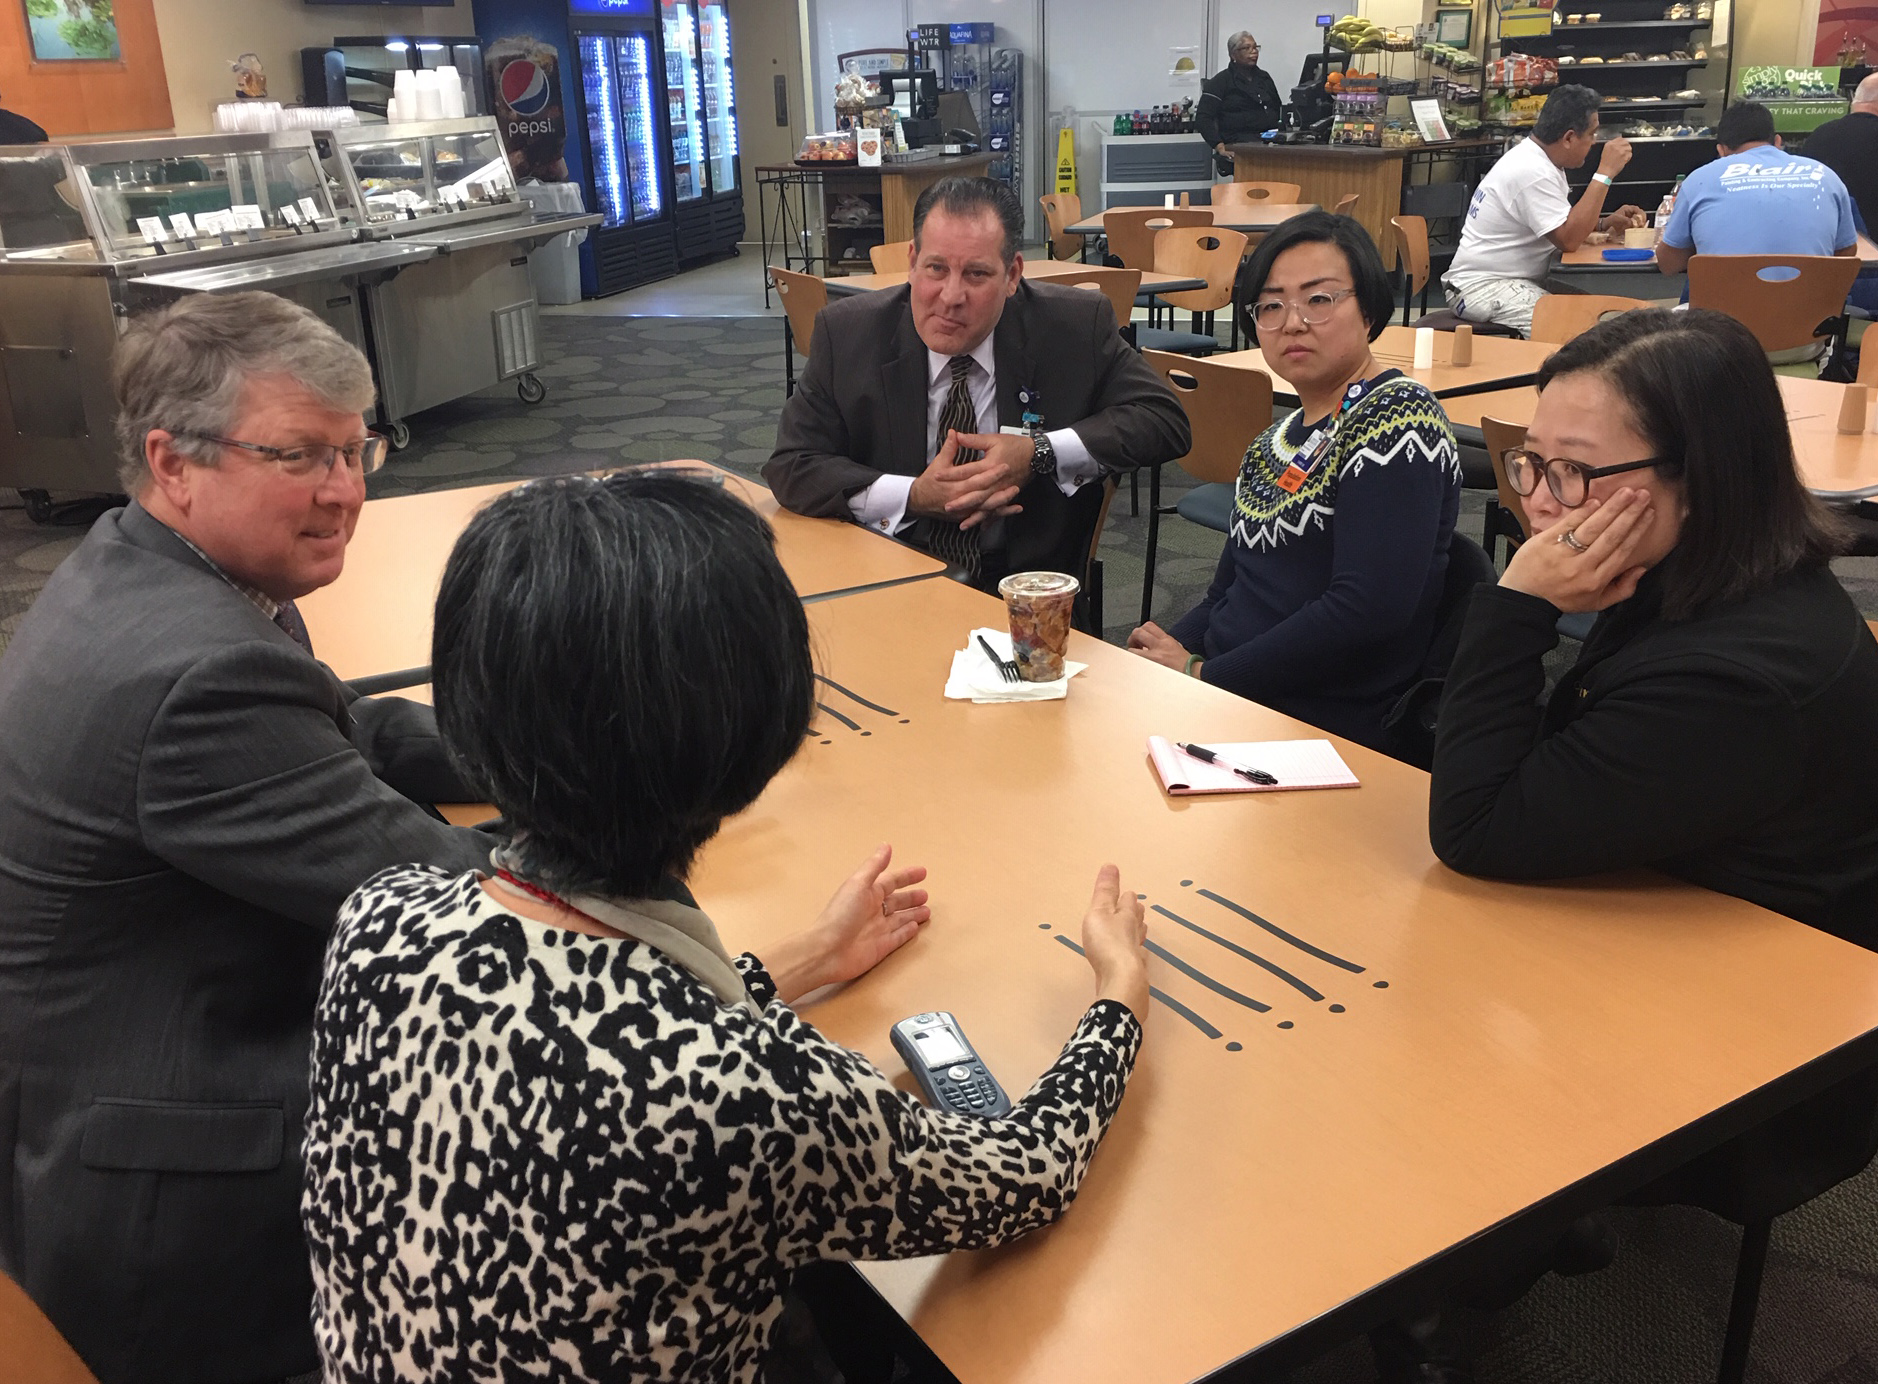 Steve Snelgrove, top left, shares lunch and conversation with hospital employees, clockwise: Jon Oravec, Tammy Liu, Rachel Lee and Bianca Chang.